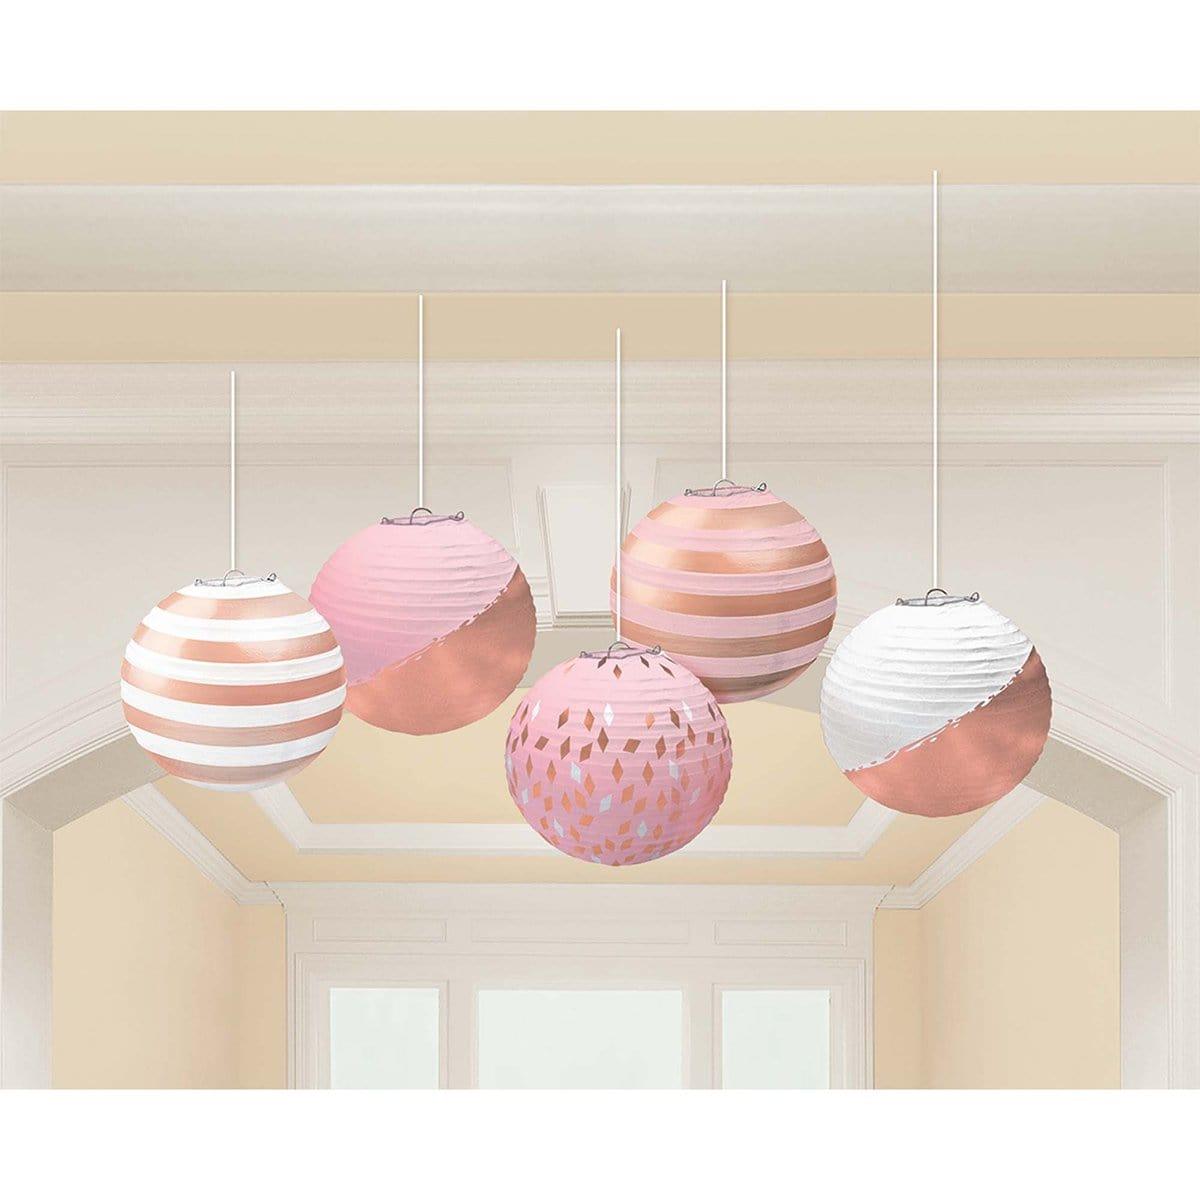 Buy Decorations Mini Paper Lantern 5/pkg - Rose Gold sold at Party Expert